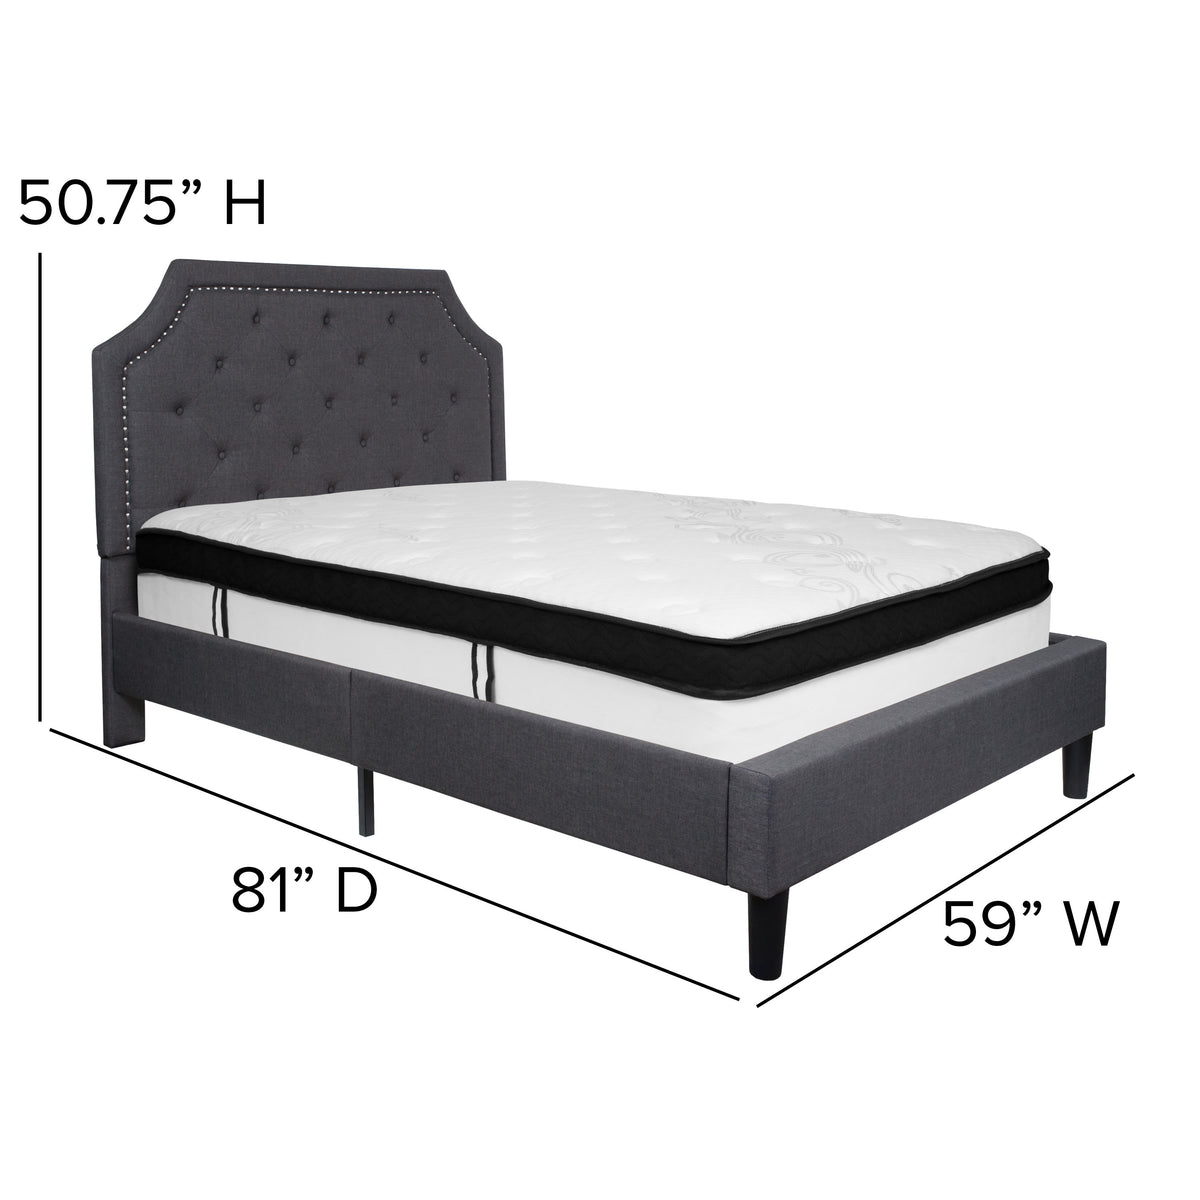 Dark Gray,Full |#| Full Size Arched Tufted Dark Gray Fabric Platform Bed with Memory Foam Mattress